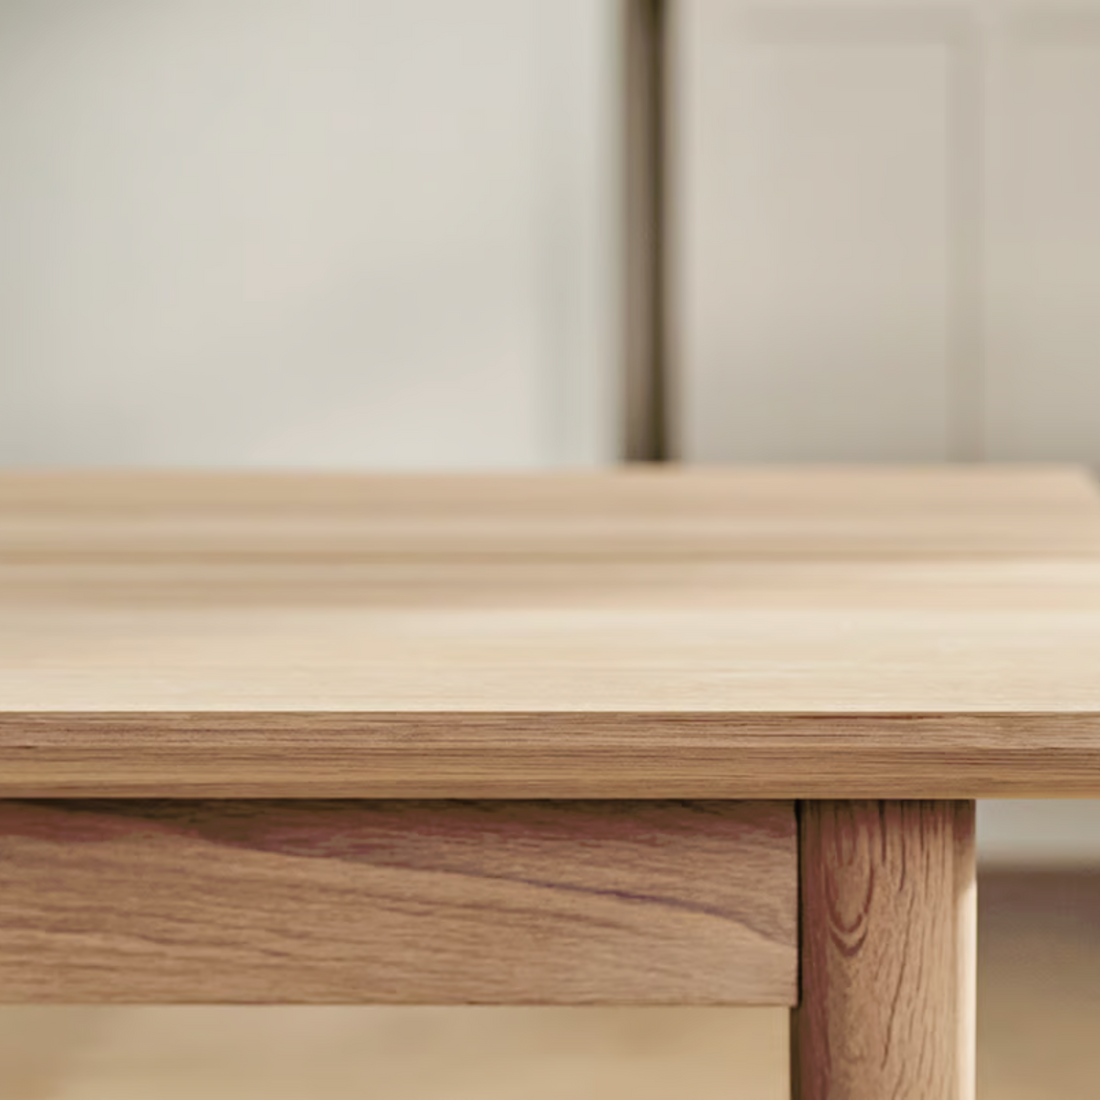 Track | Wood Dining table